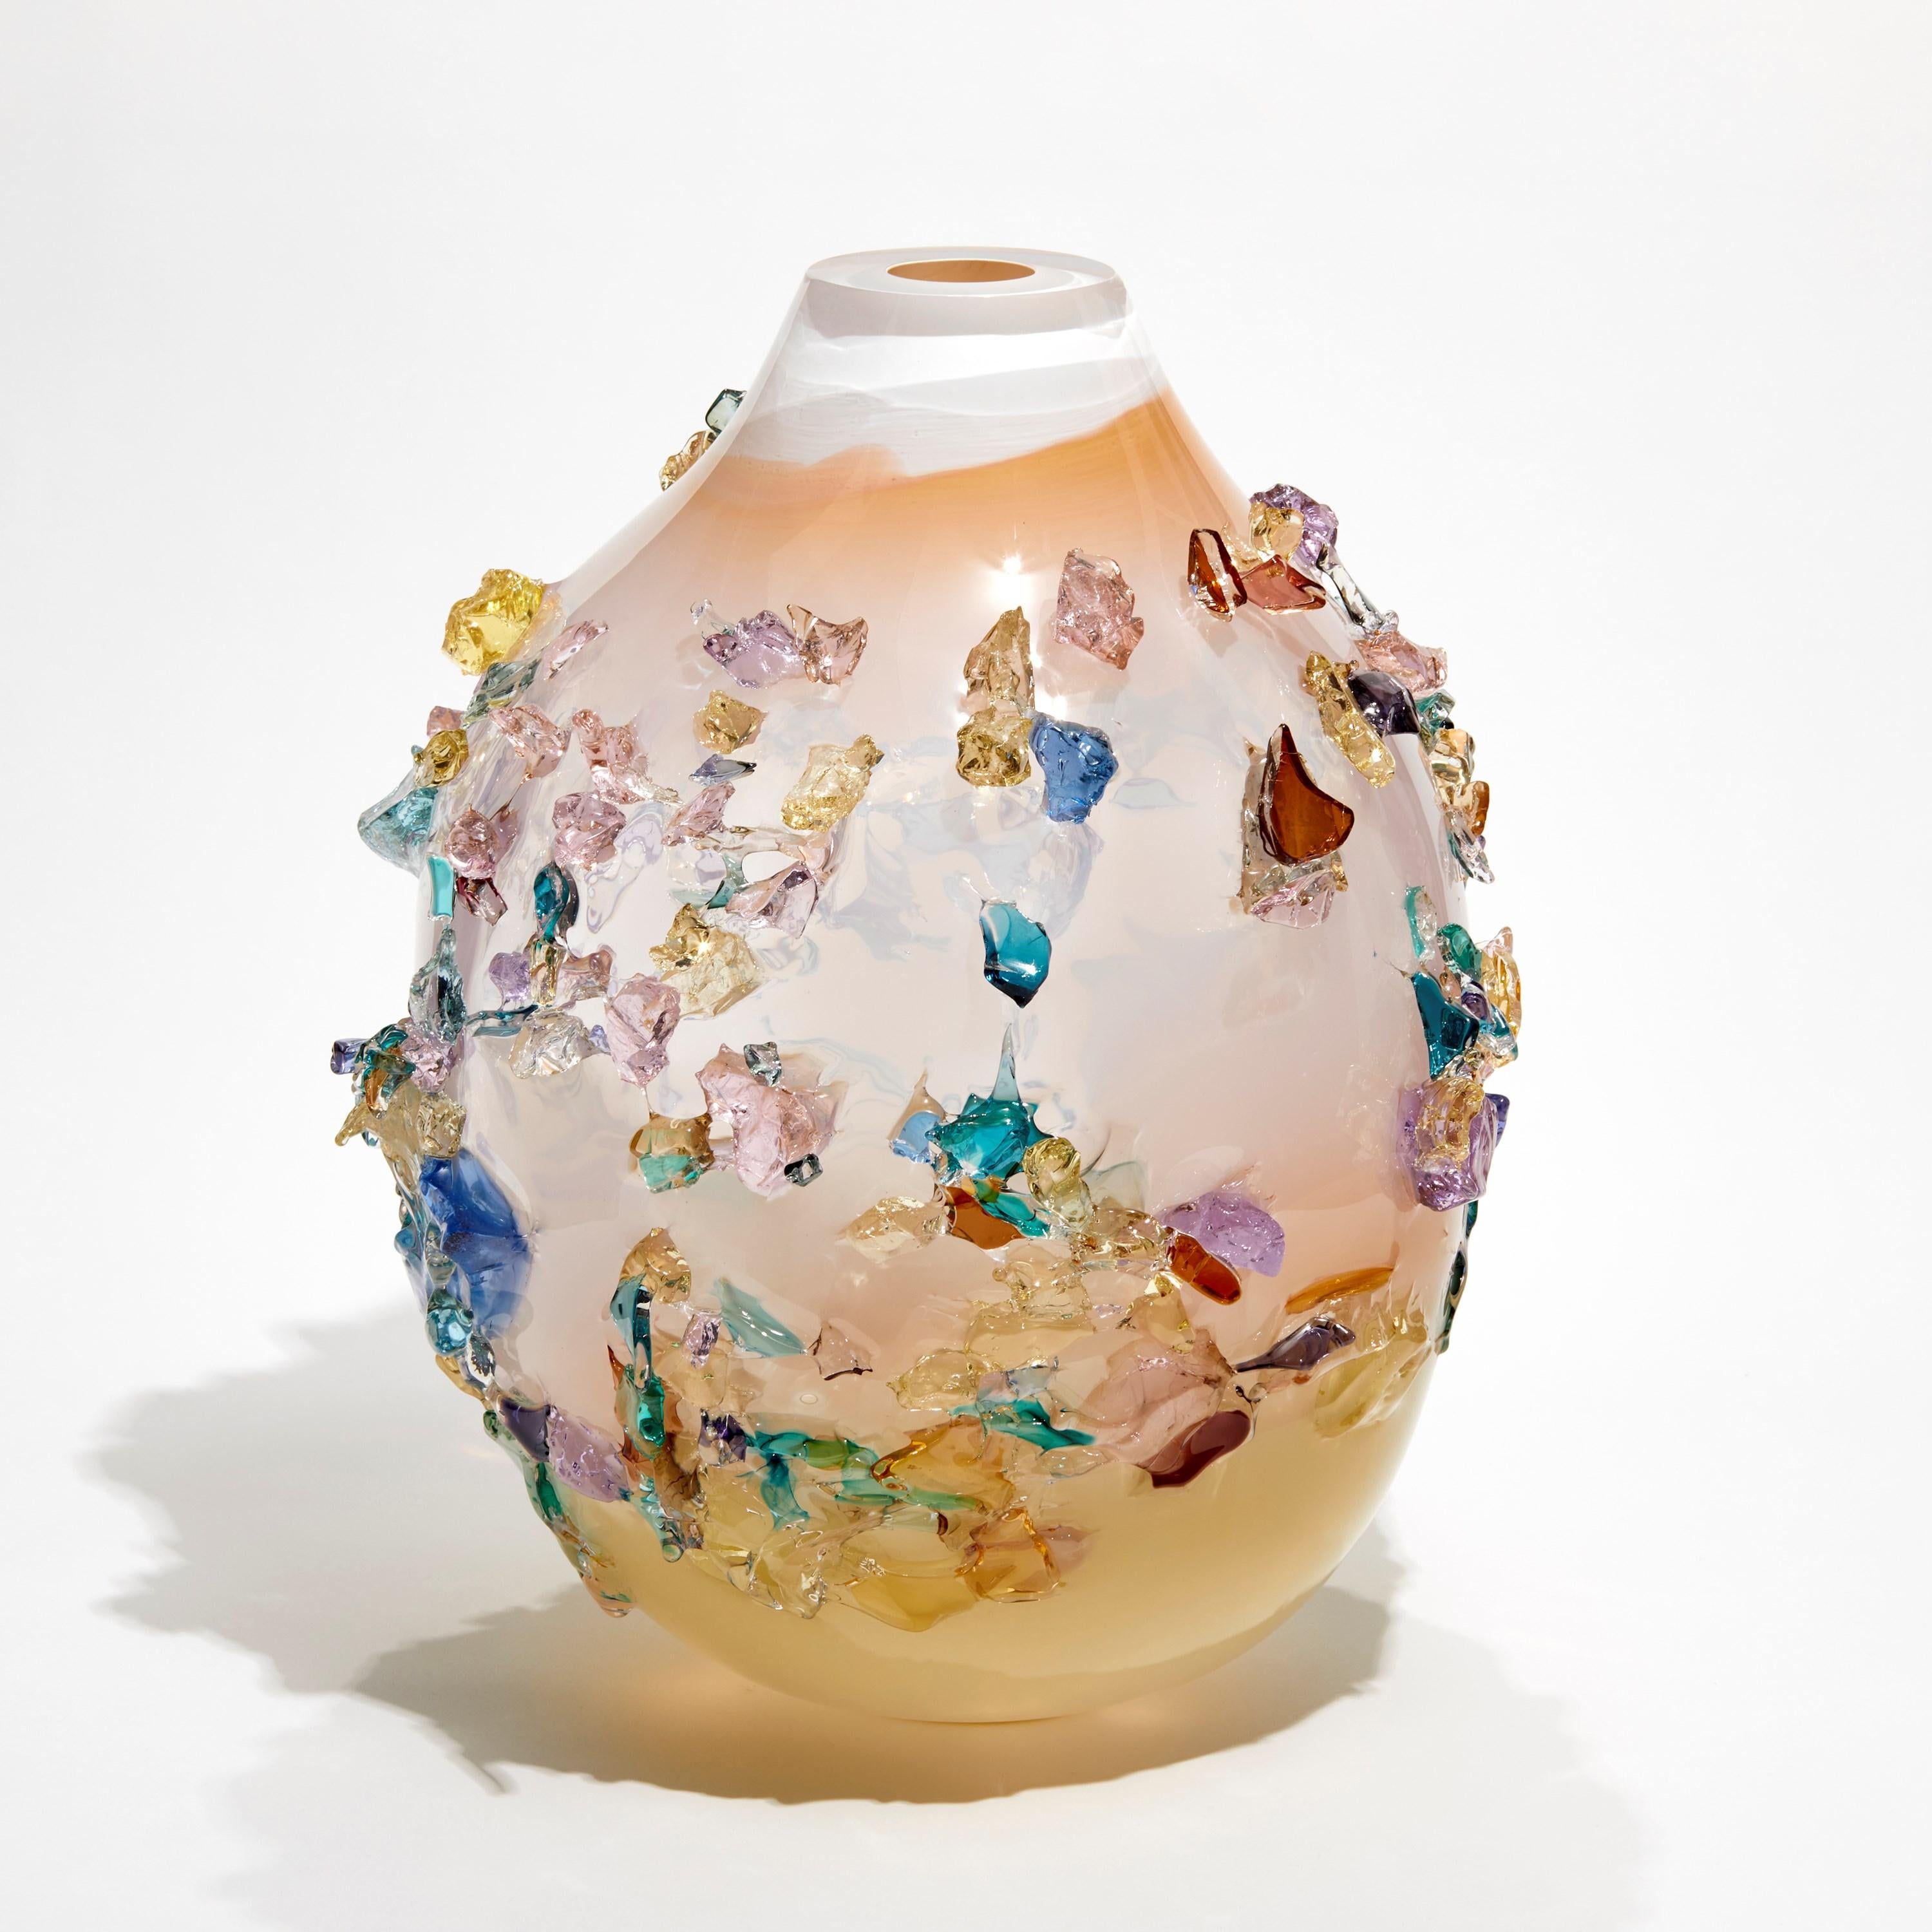 Sakura TRP21015 is a unique soft coral, dusky pink, white and multicolored hand-blown art glass sculptural vase, covered in an organic glass shard adornment by the Dutch artist Maarten Vorlijk. The piece is flame polished to soften the edges of all